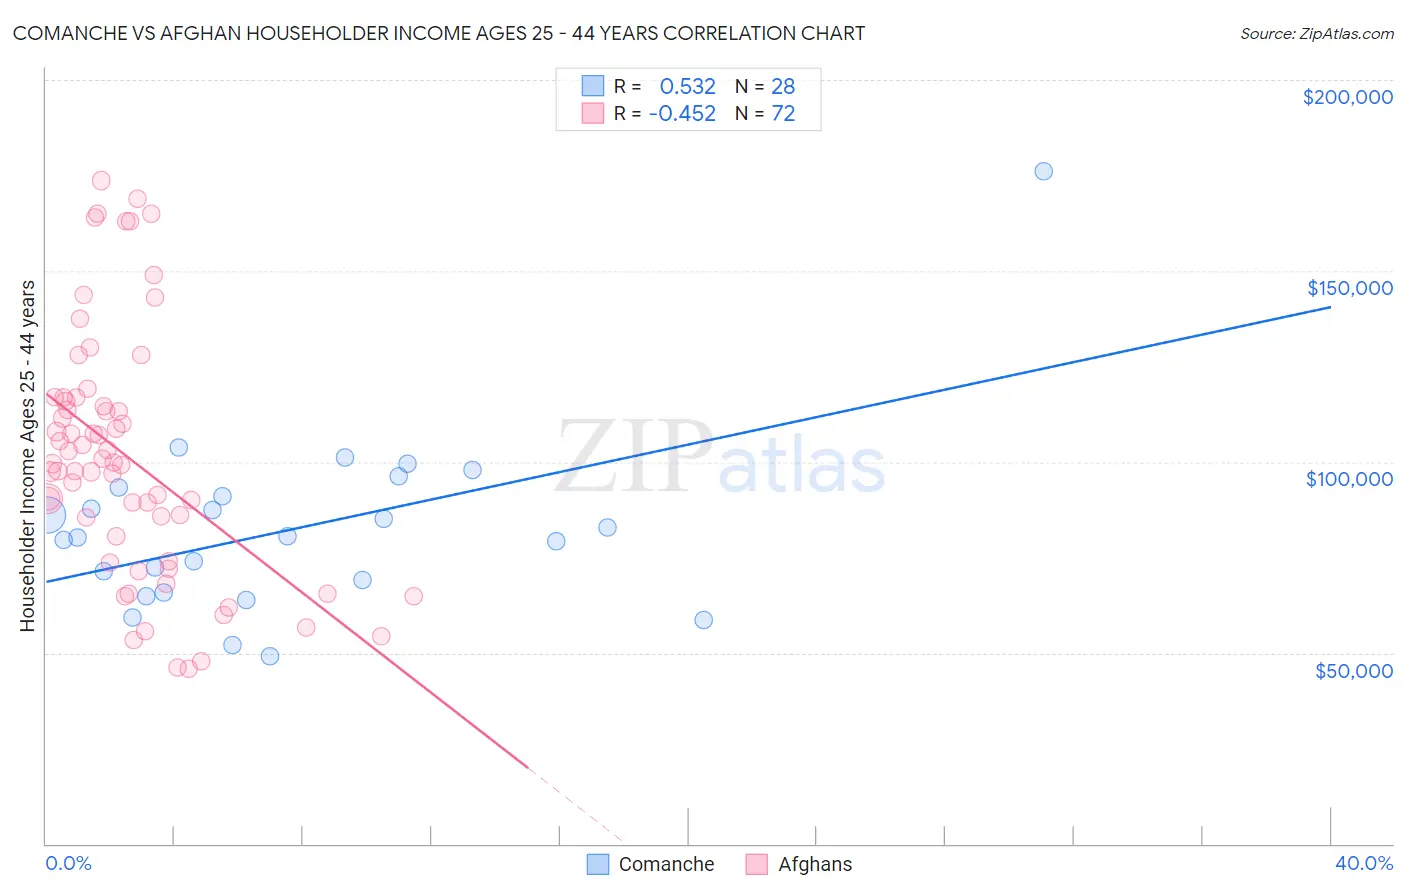 Comanche vs Afghan Householder Income Ages 25 - 44 years